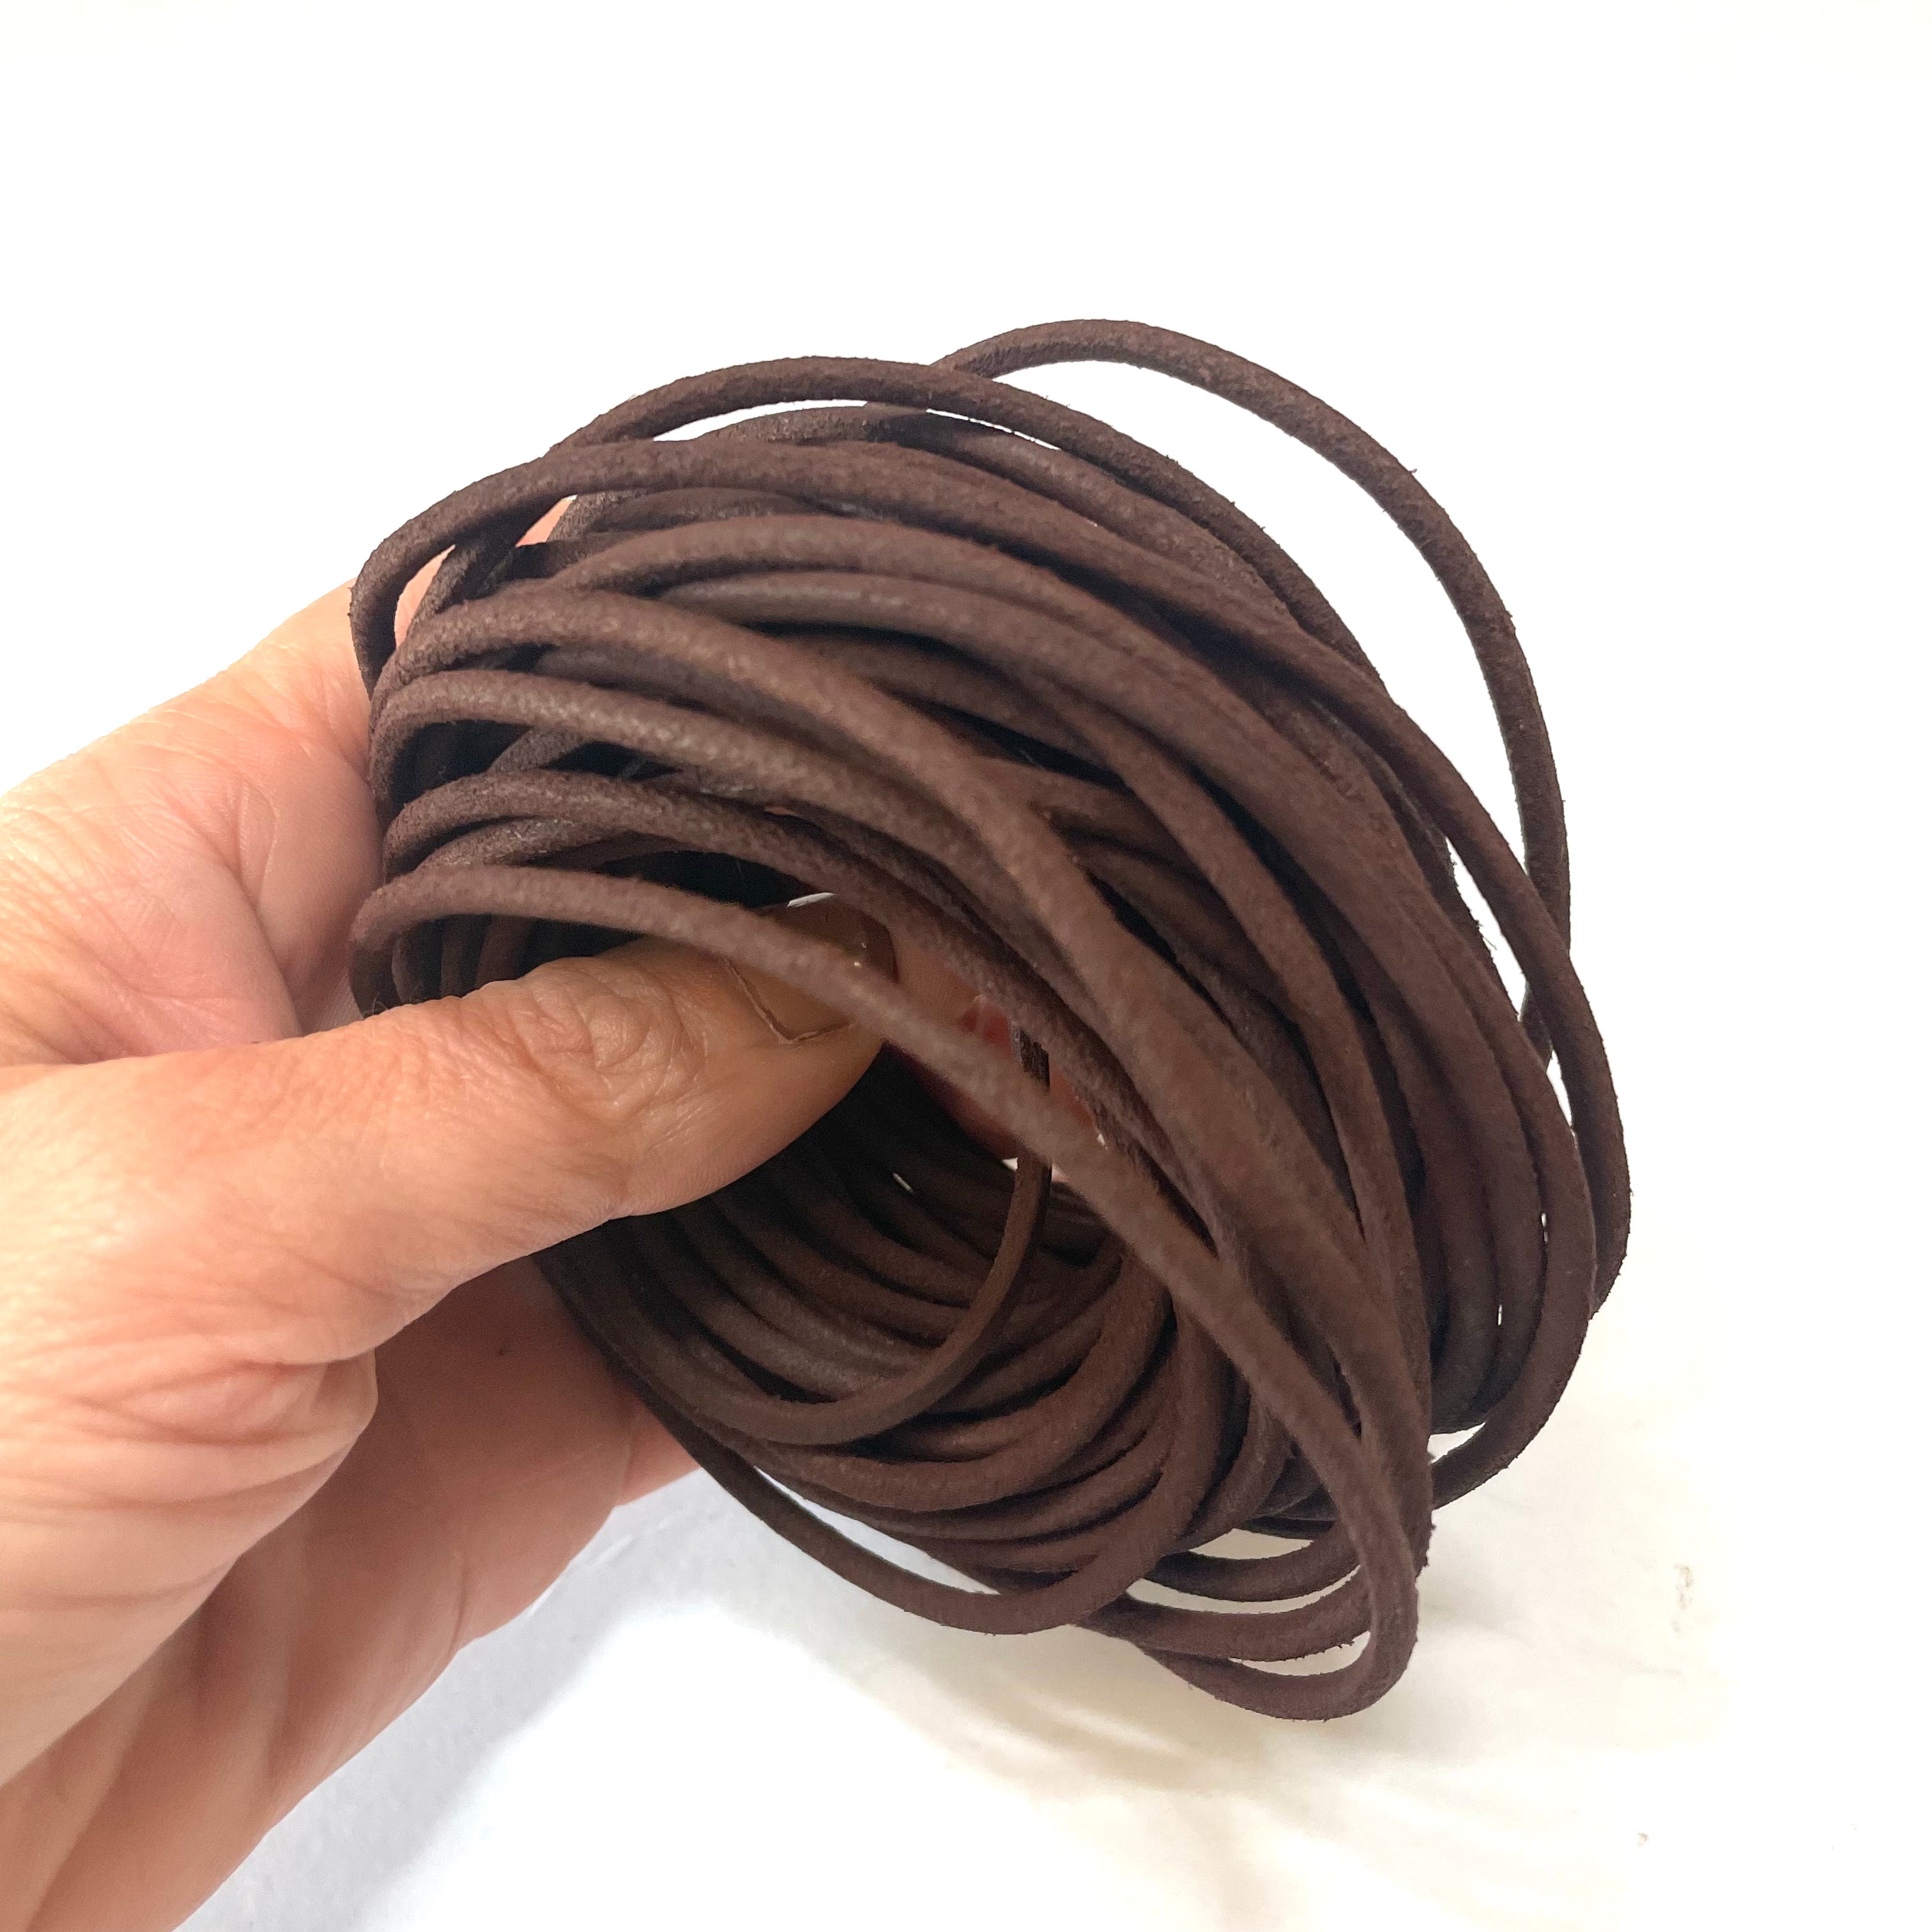 Natural Genuine Leather Cord per 10 Yards - Brushed Chocolate 3mm